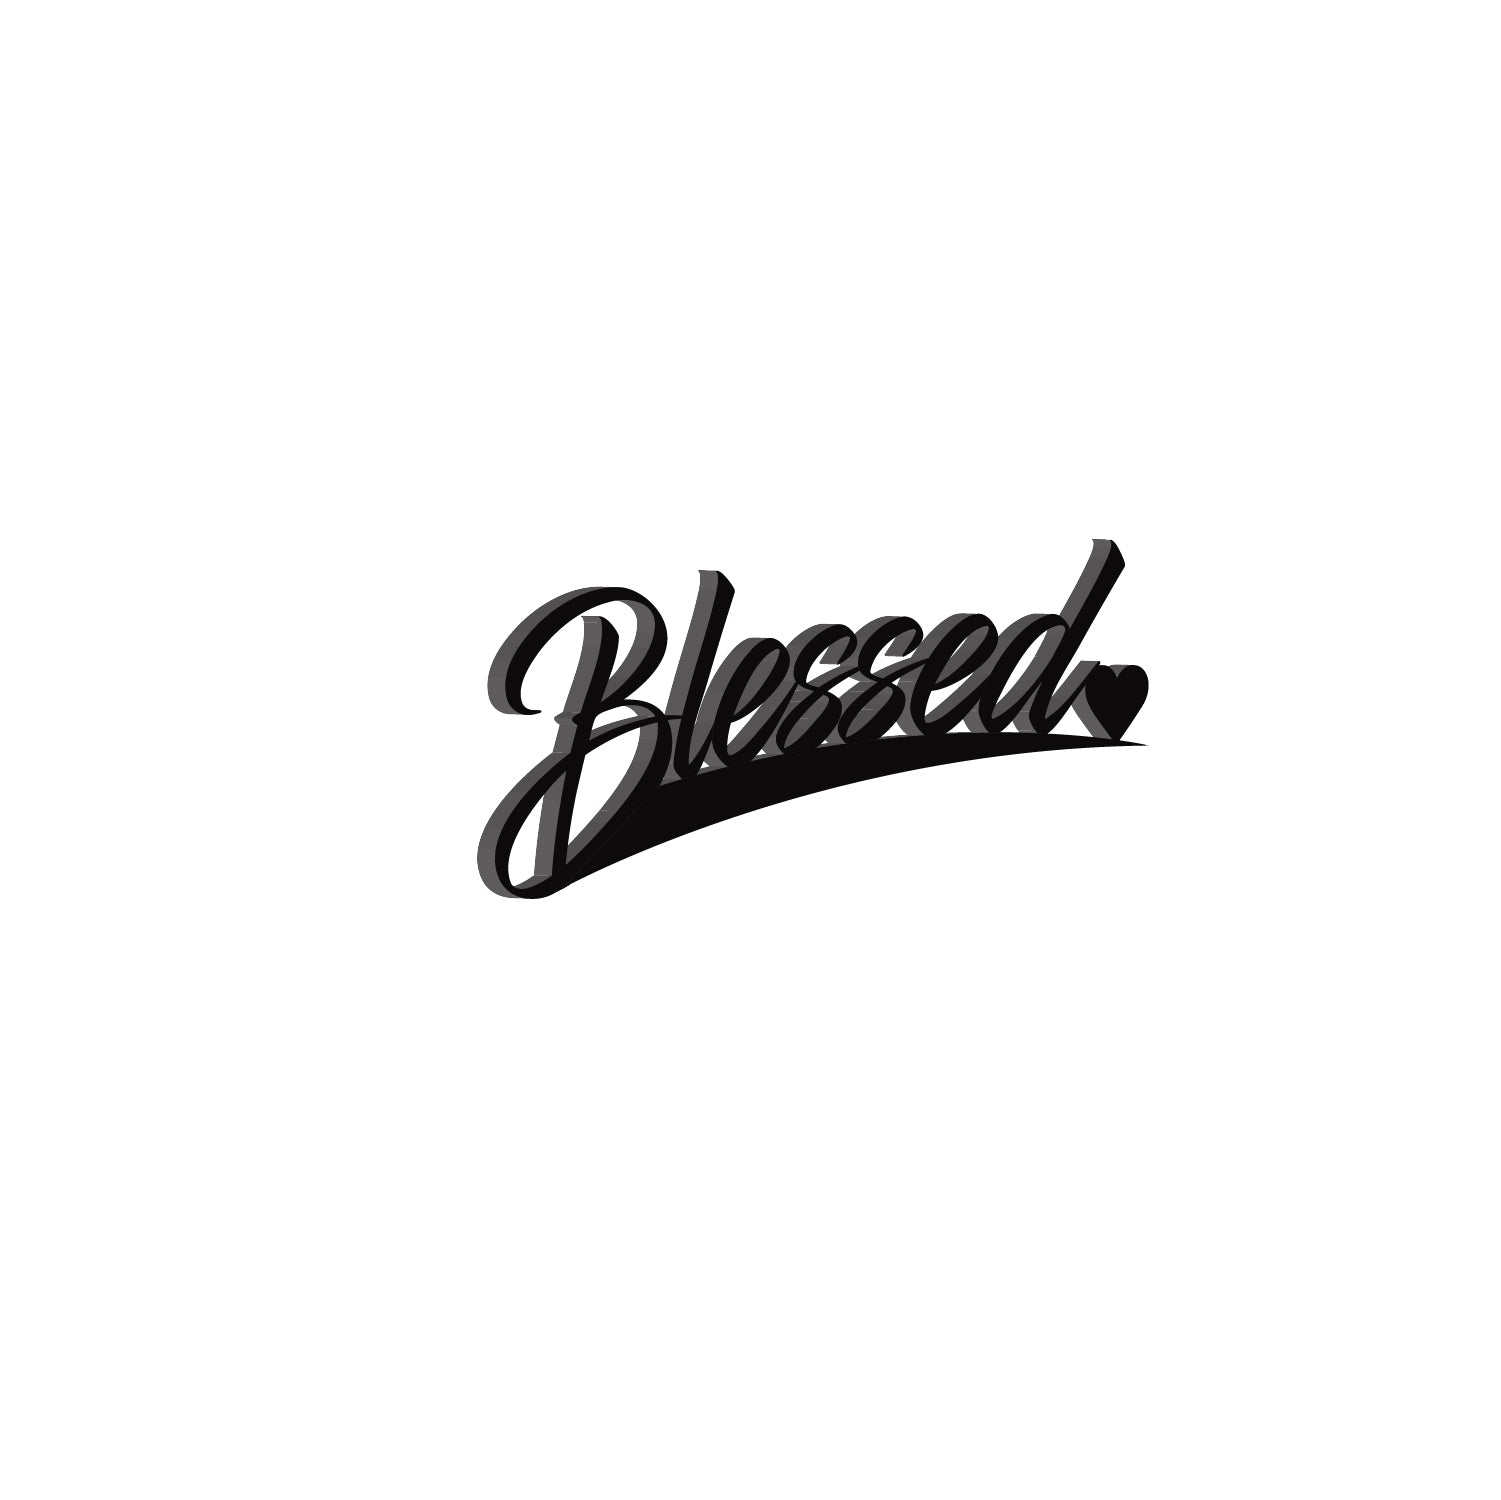 Blessed Black Engineered Wood Wall Art Cutout, Ready To Hang Home Decor 1